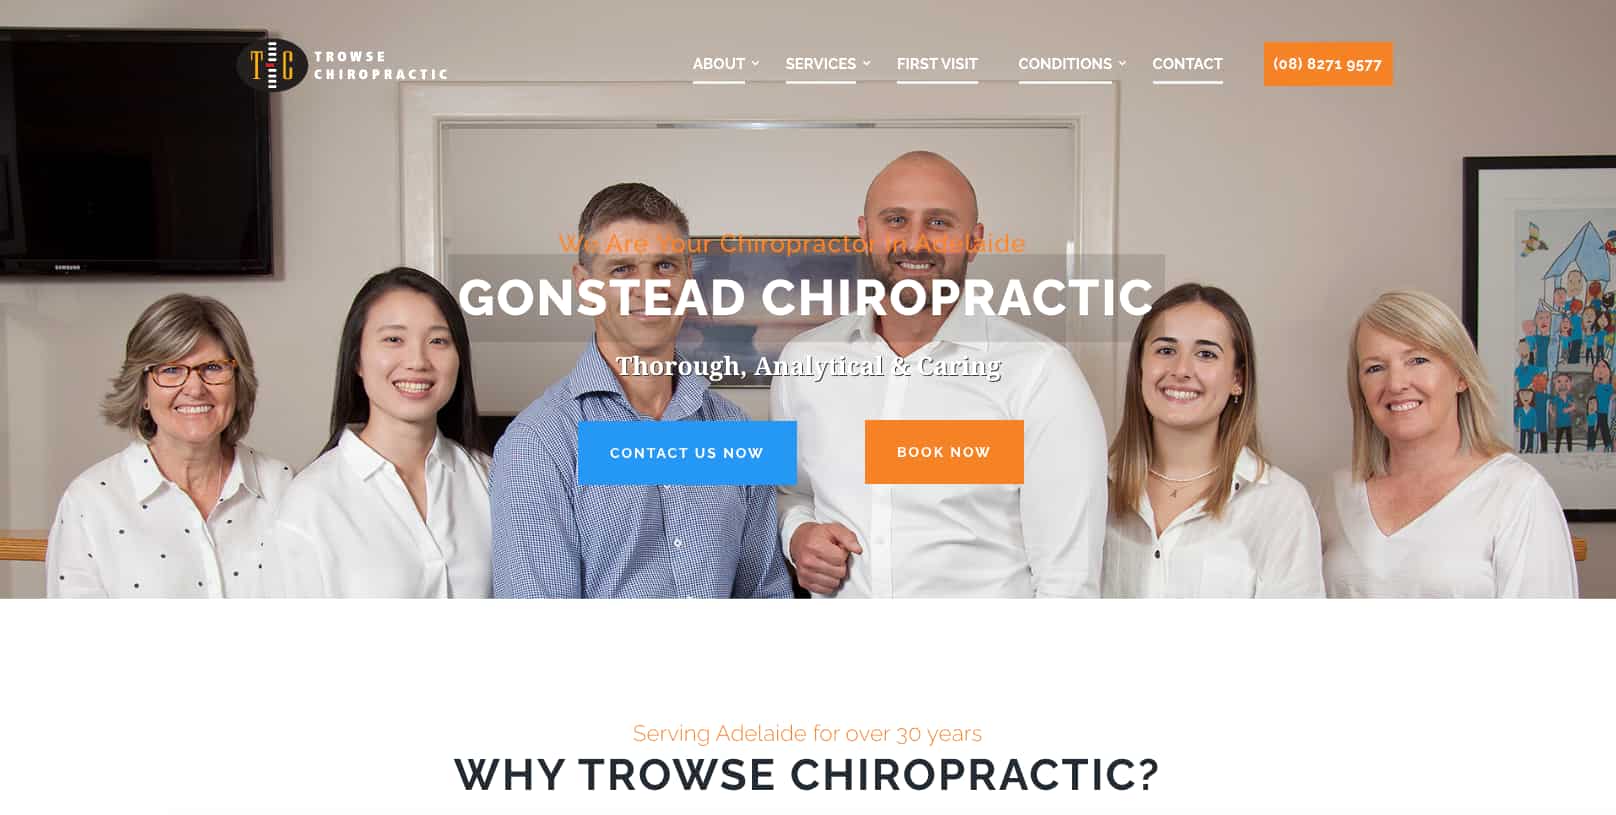 Trowse Chiropractic